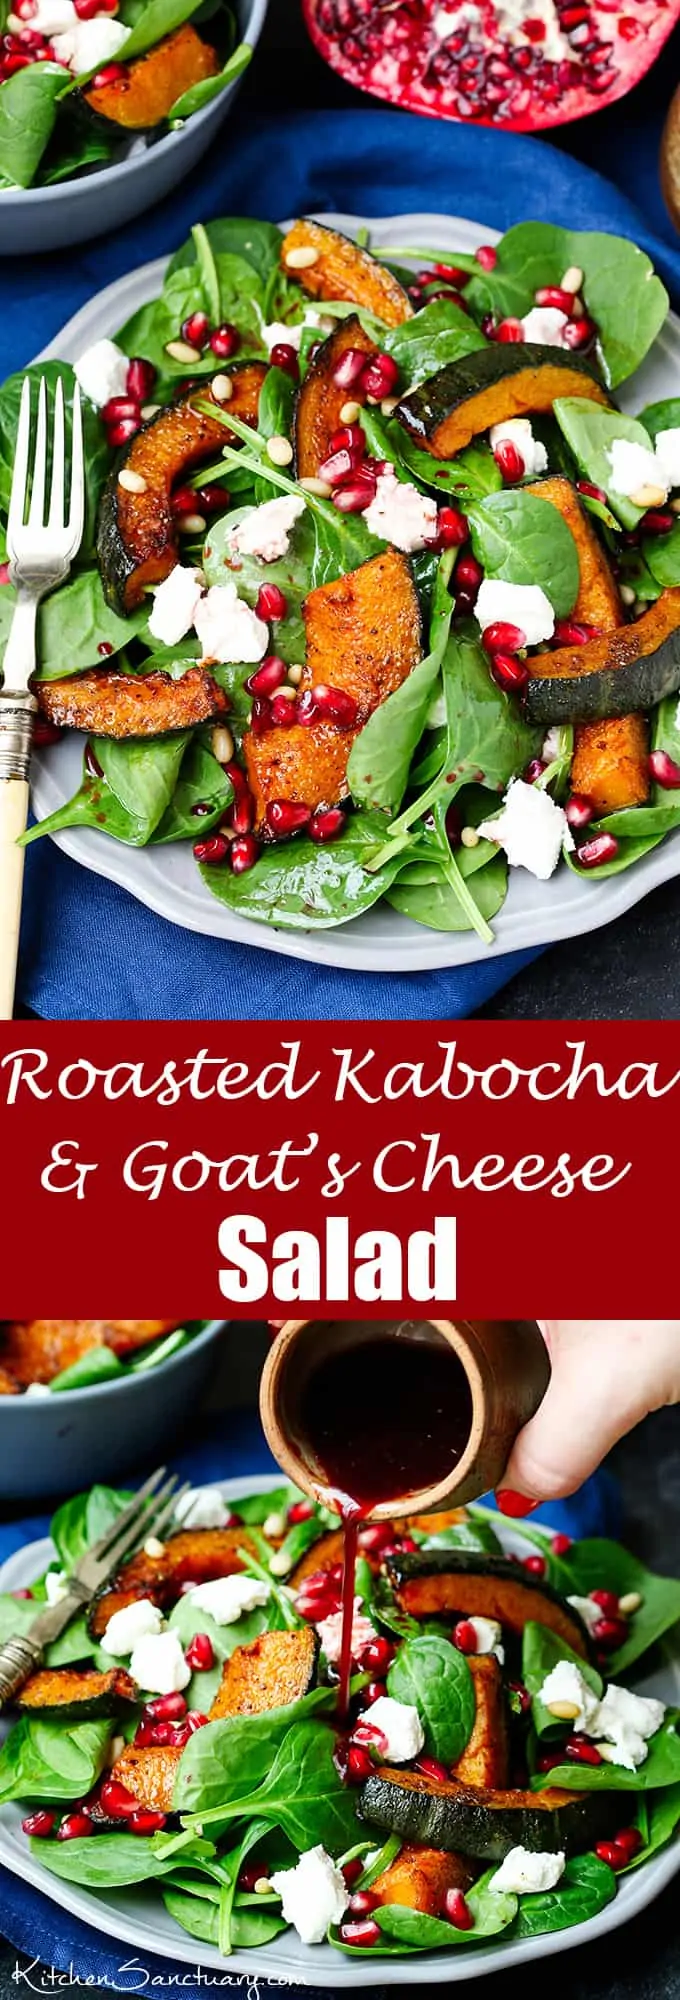 Sweet Roasted Kabocha Squash Salad - with creamy goat's cheese and a tangy pomegranate dressing. A deliciously filling dinner - perfect for Meatless Monday!